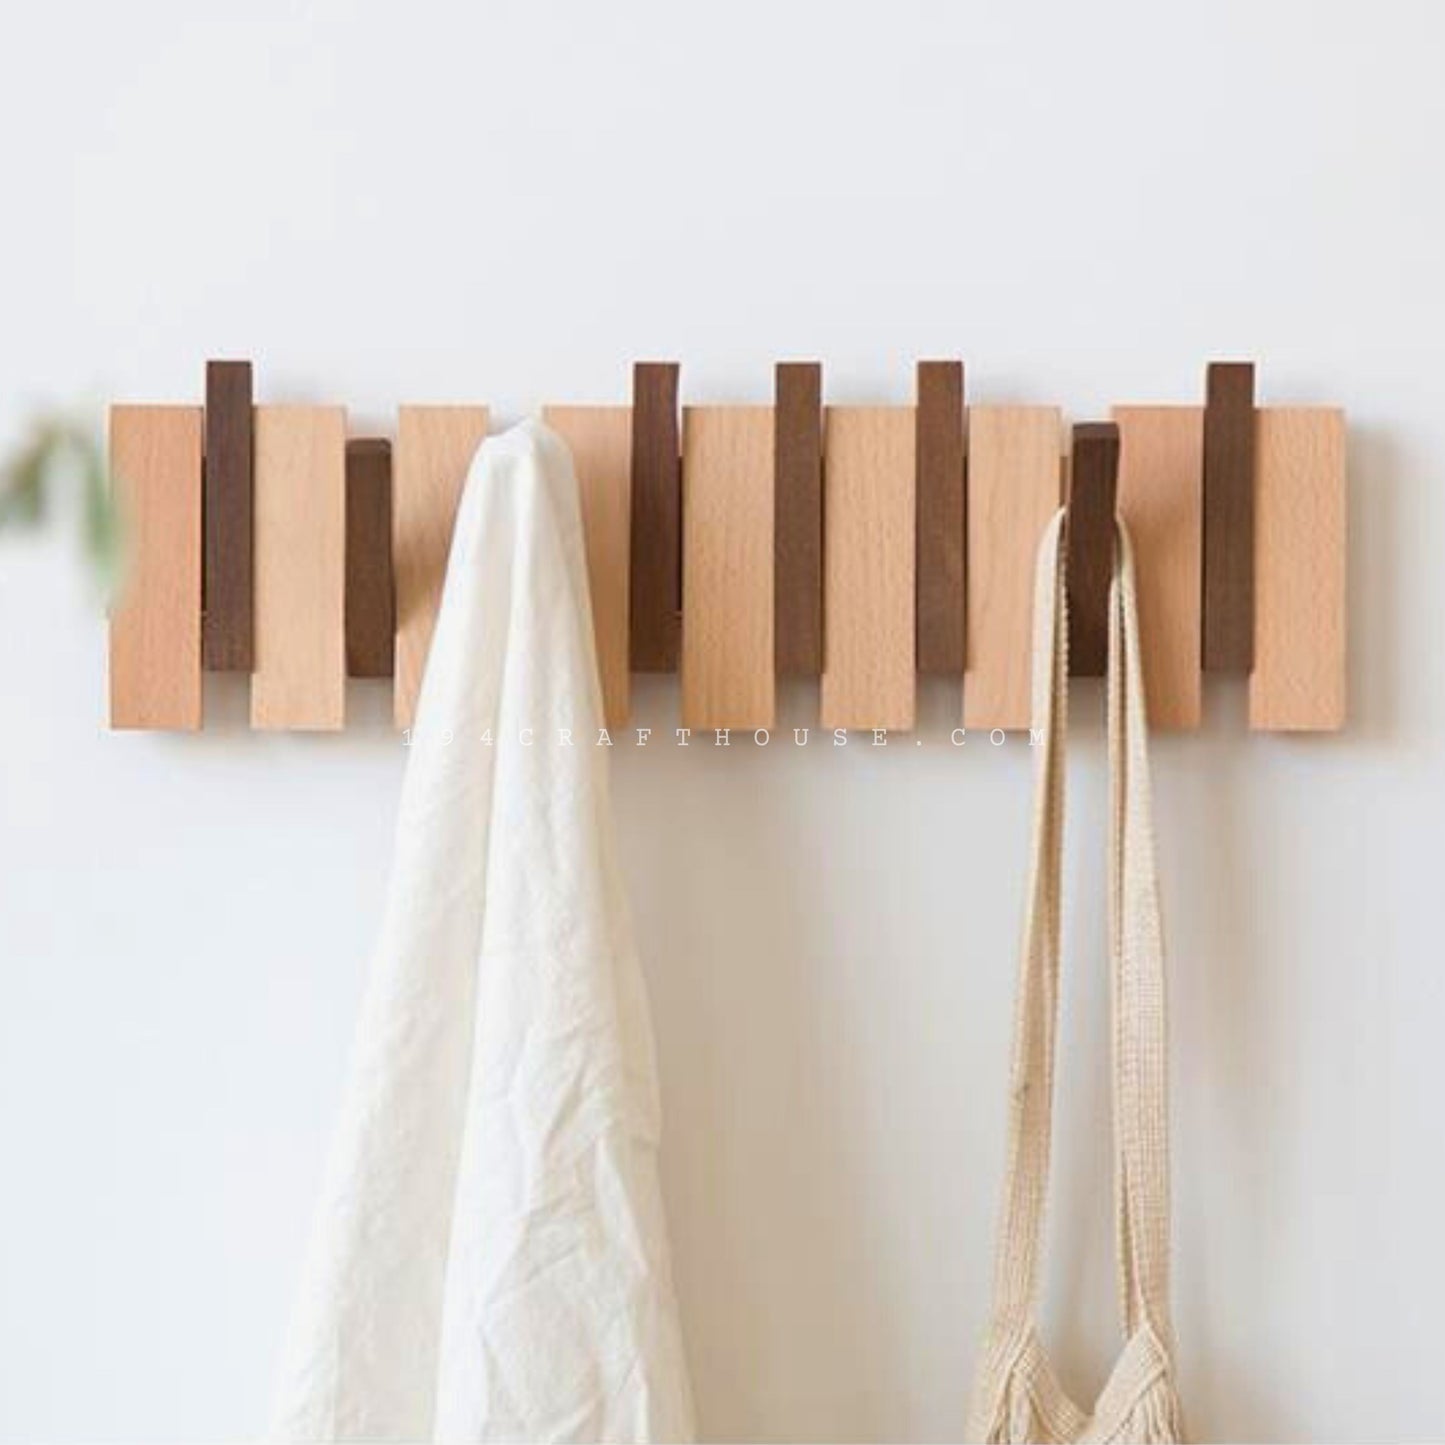 Piano Wooden Wall Hanger Foldable Clothes 8 Hooks | Home & Living Decor